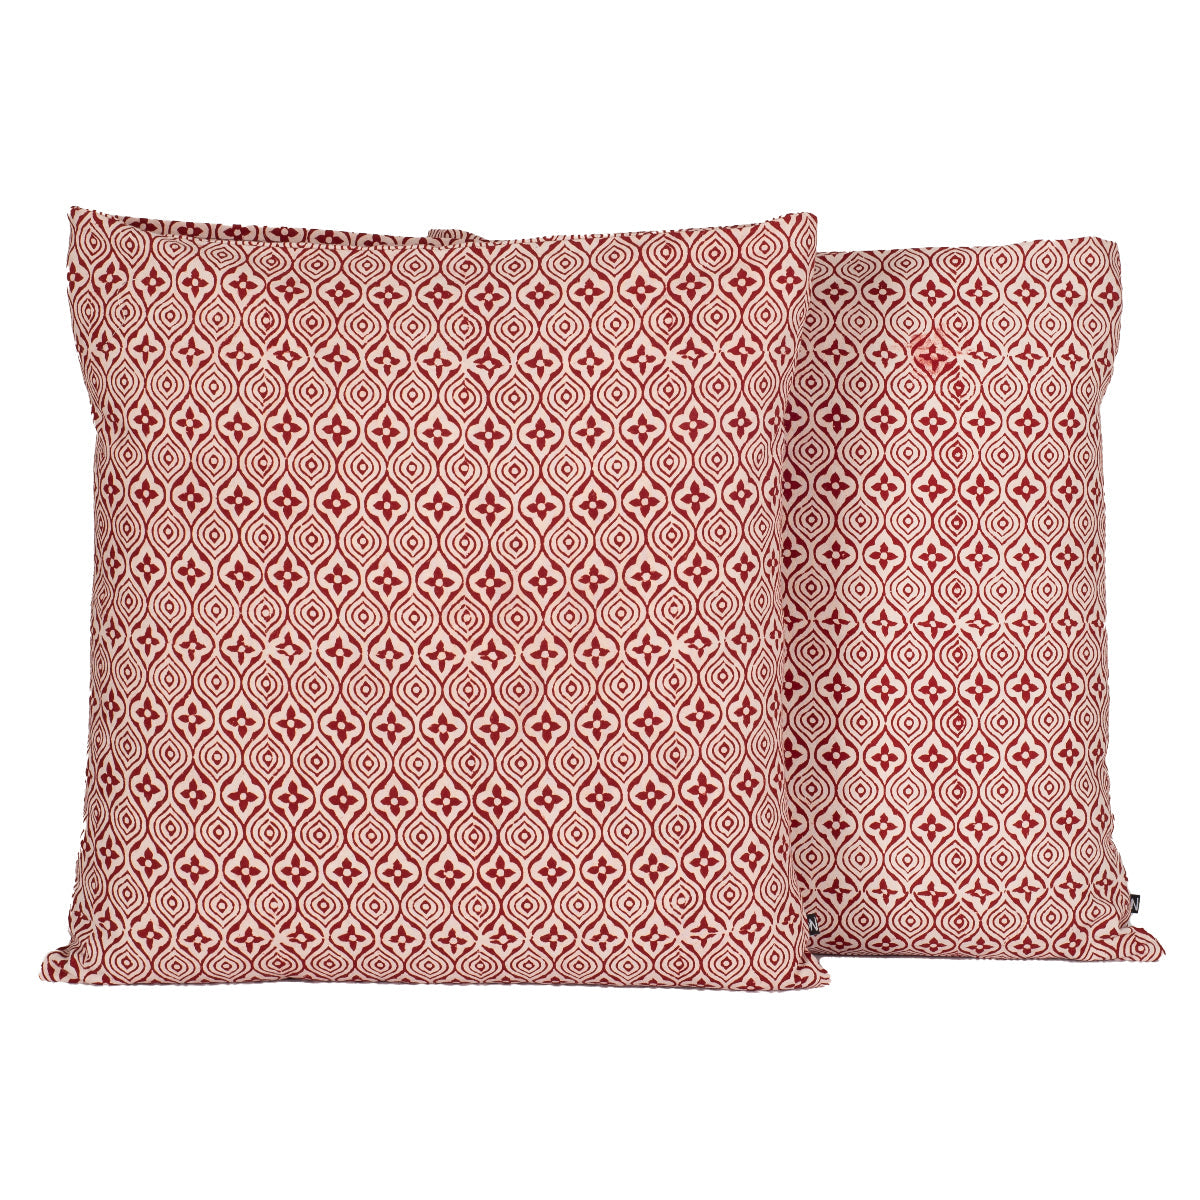 Flower Tile Bagh Hand Block Print Cotton Cushion Cover - Red White-2